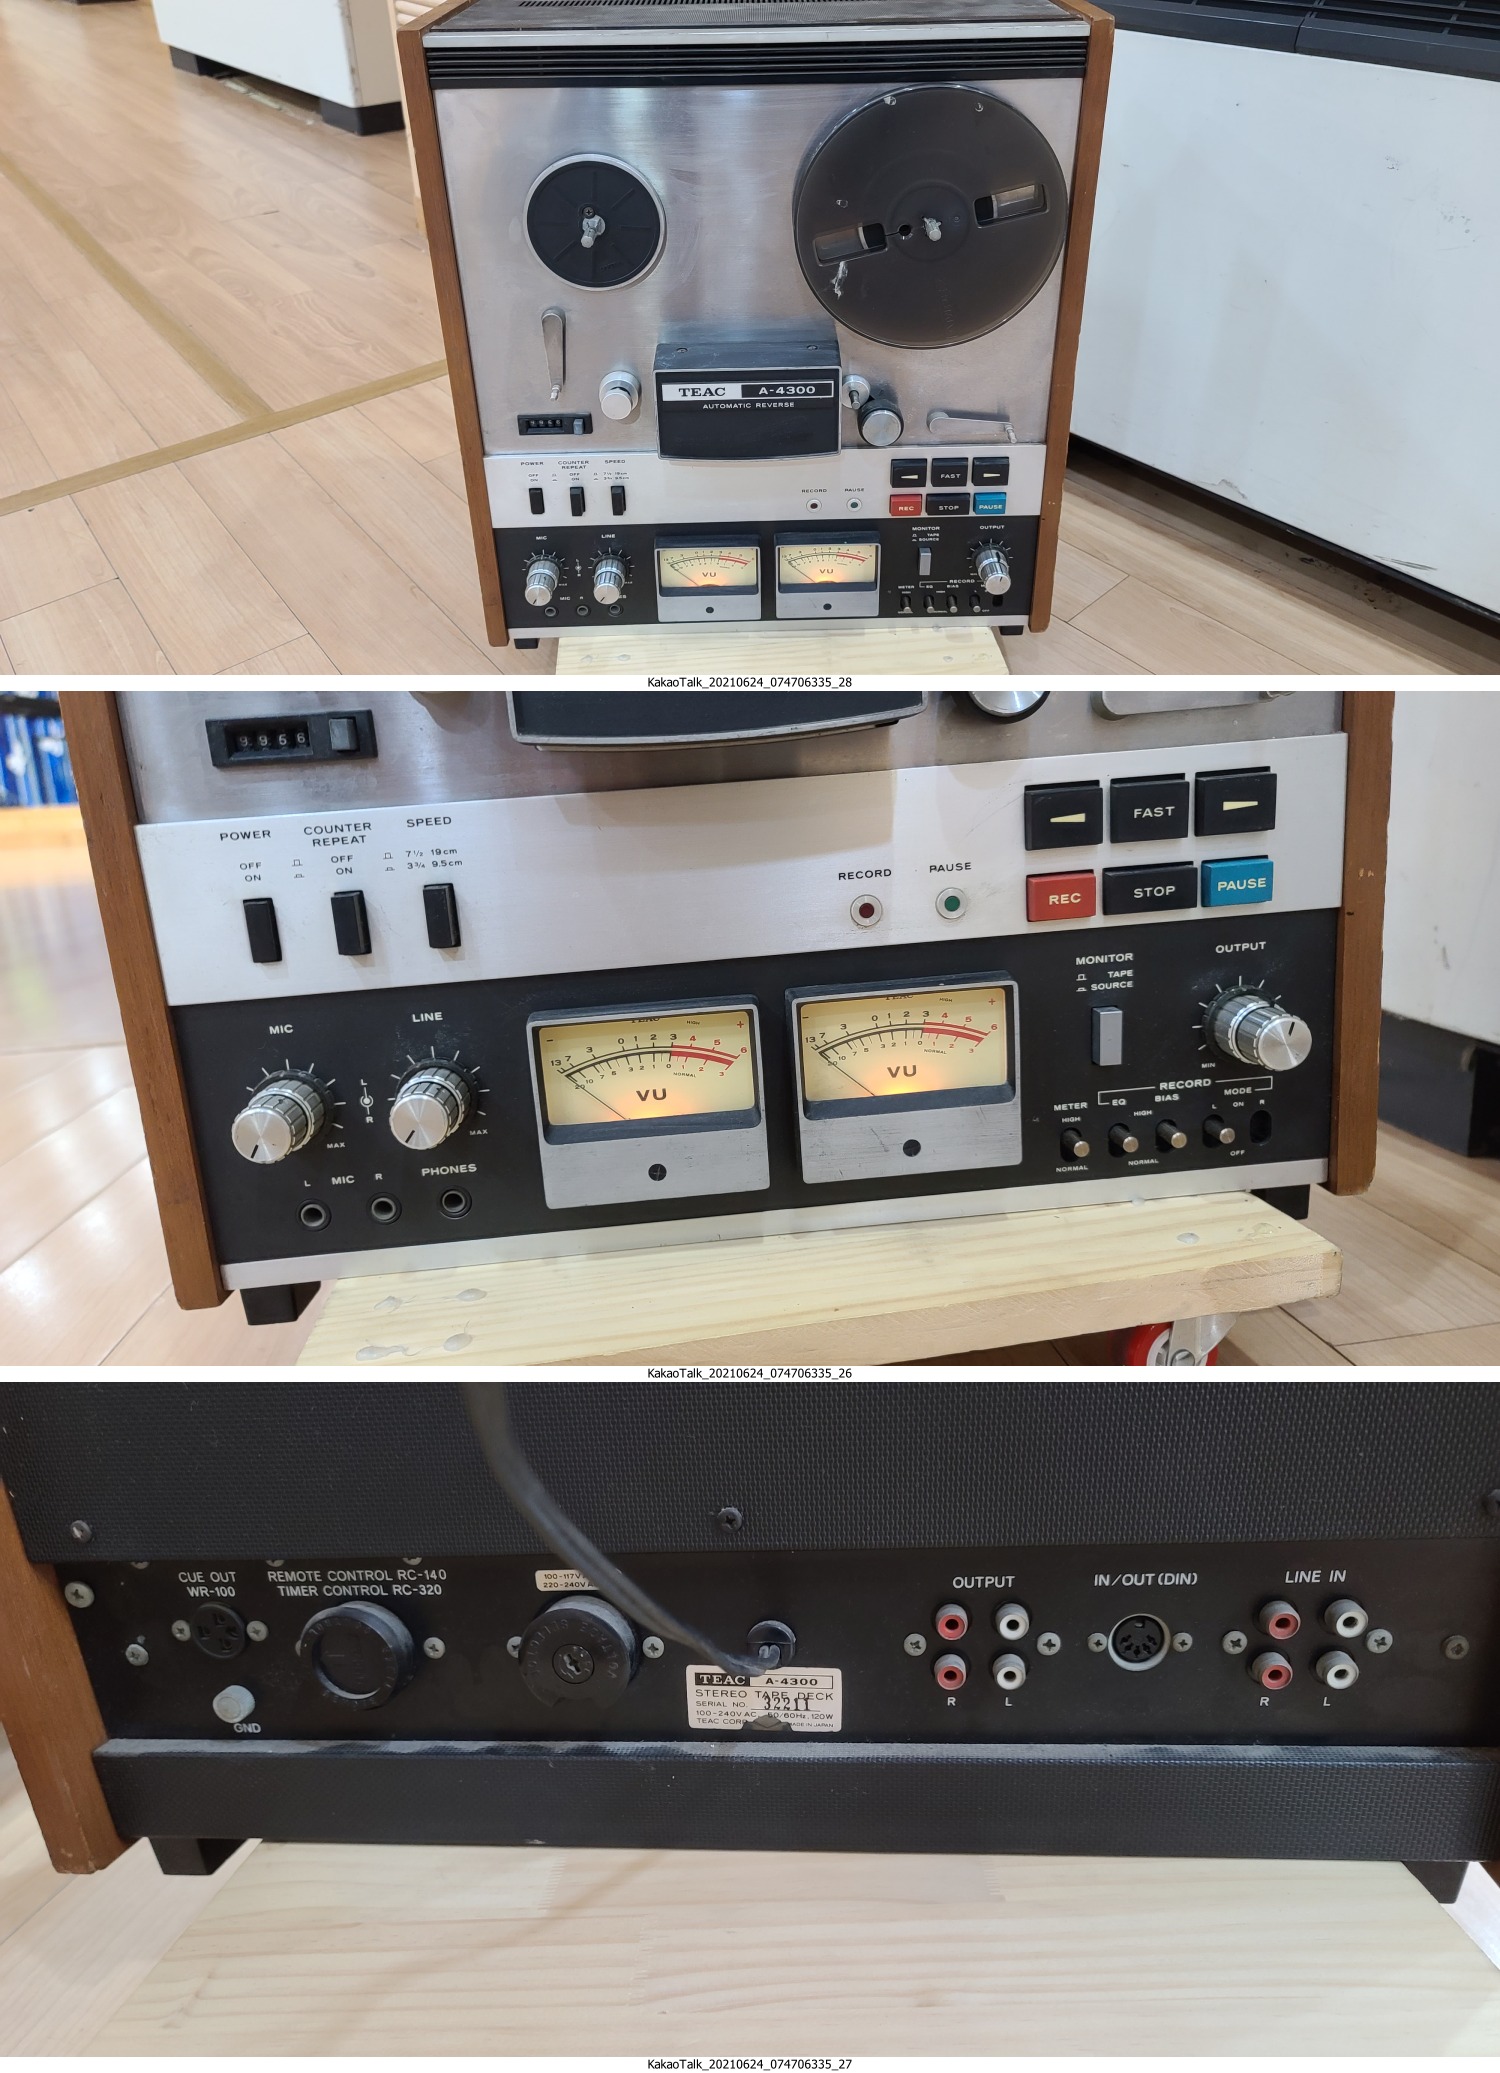 TEAC A-4300SX Stereo Reel To Reel Tape Recorder Manual HiFi, 43% OFF